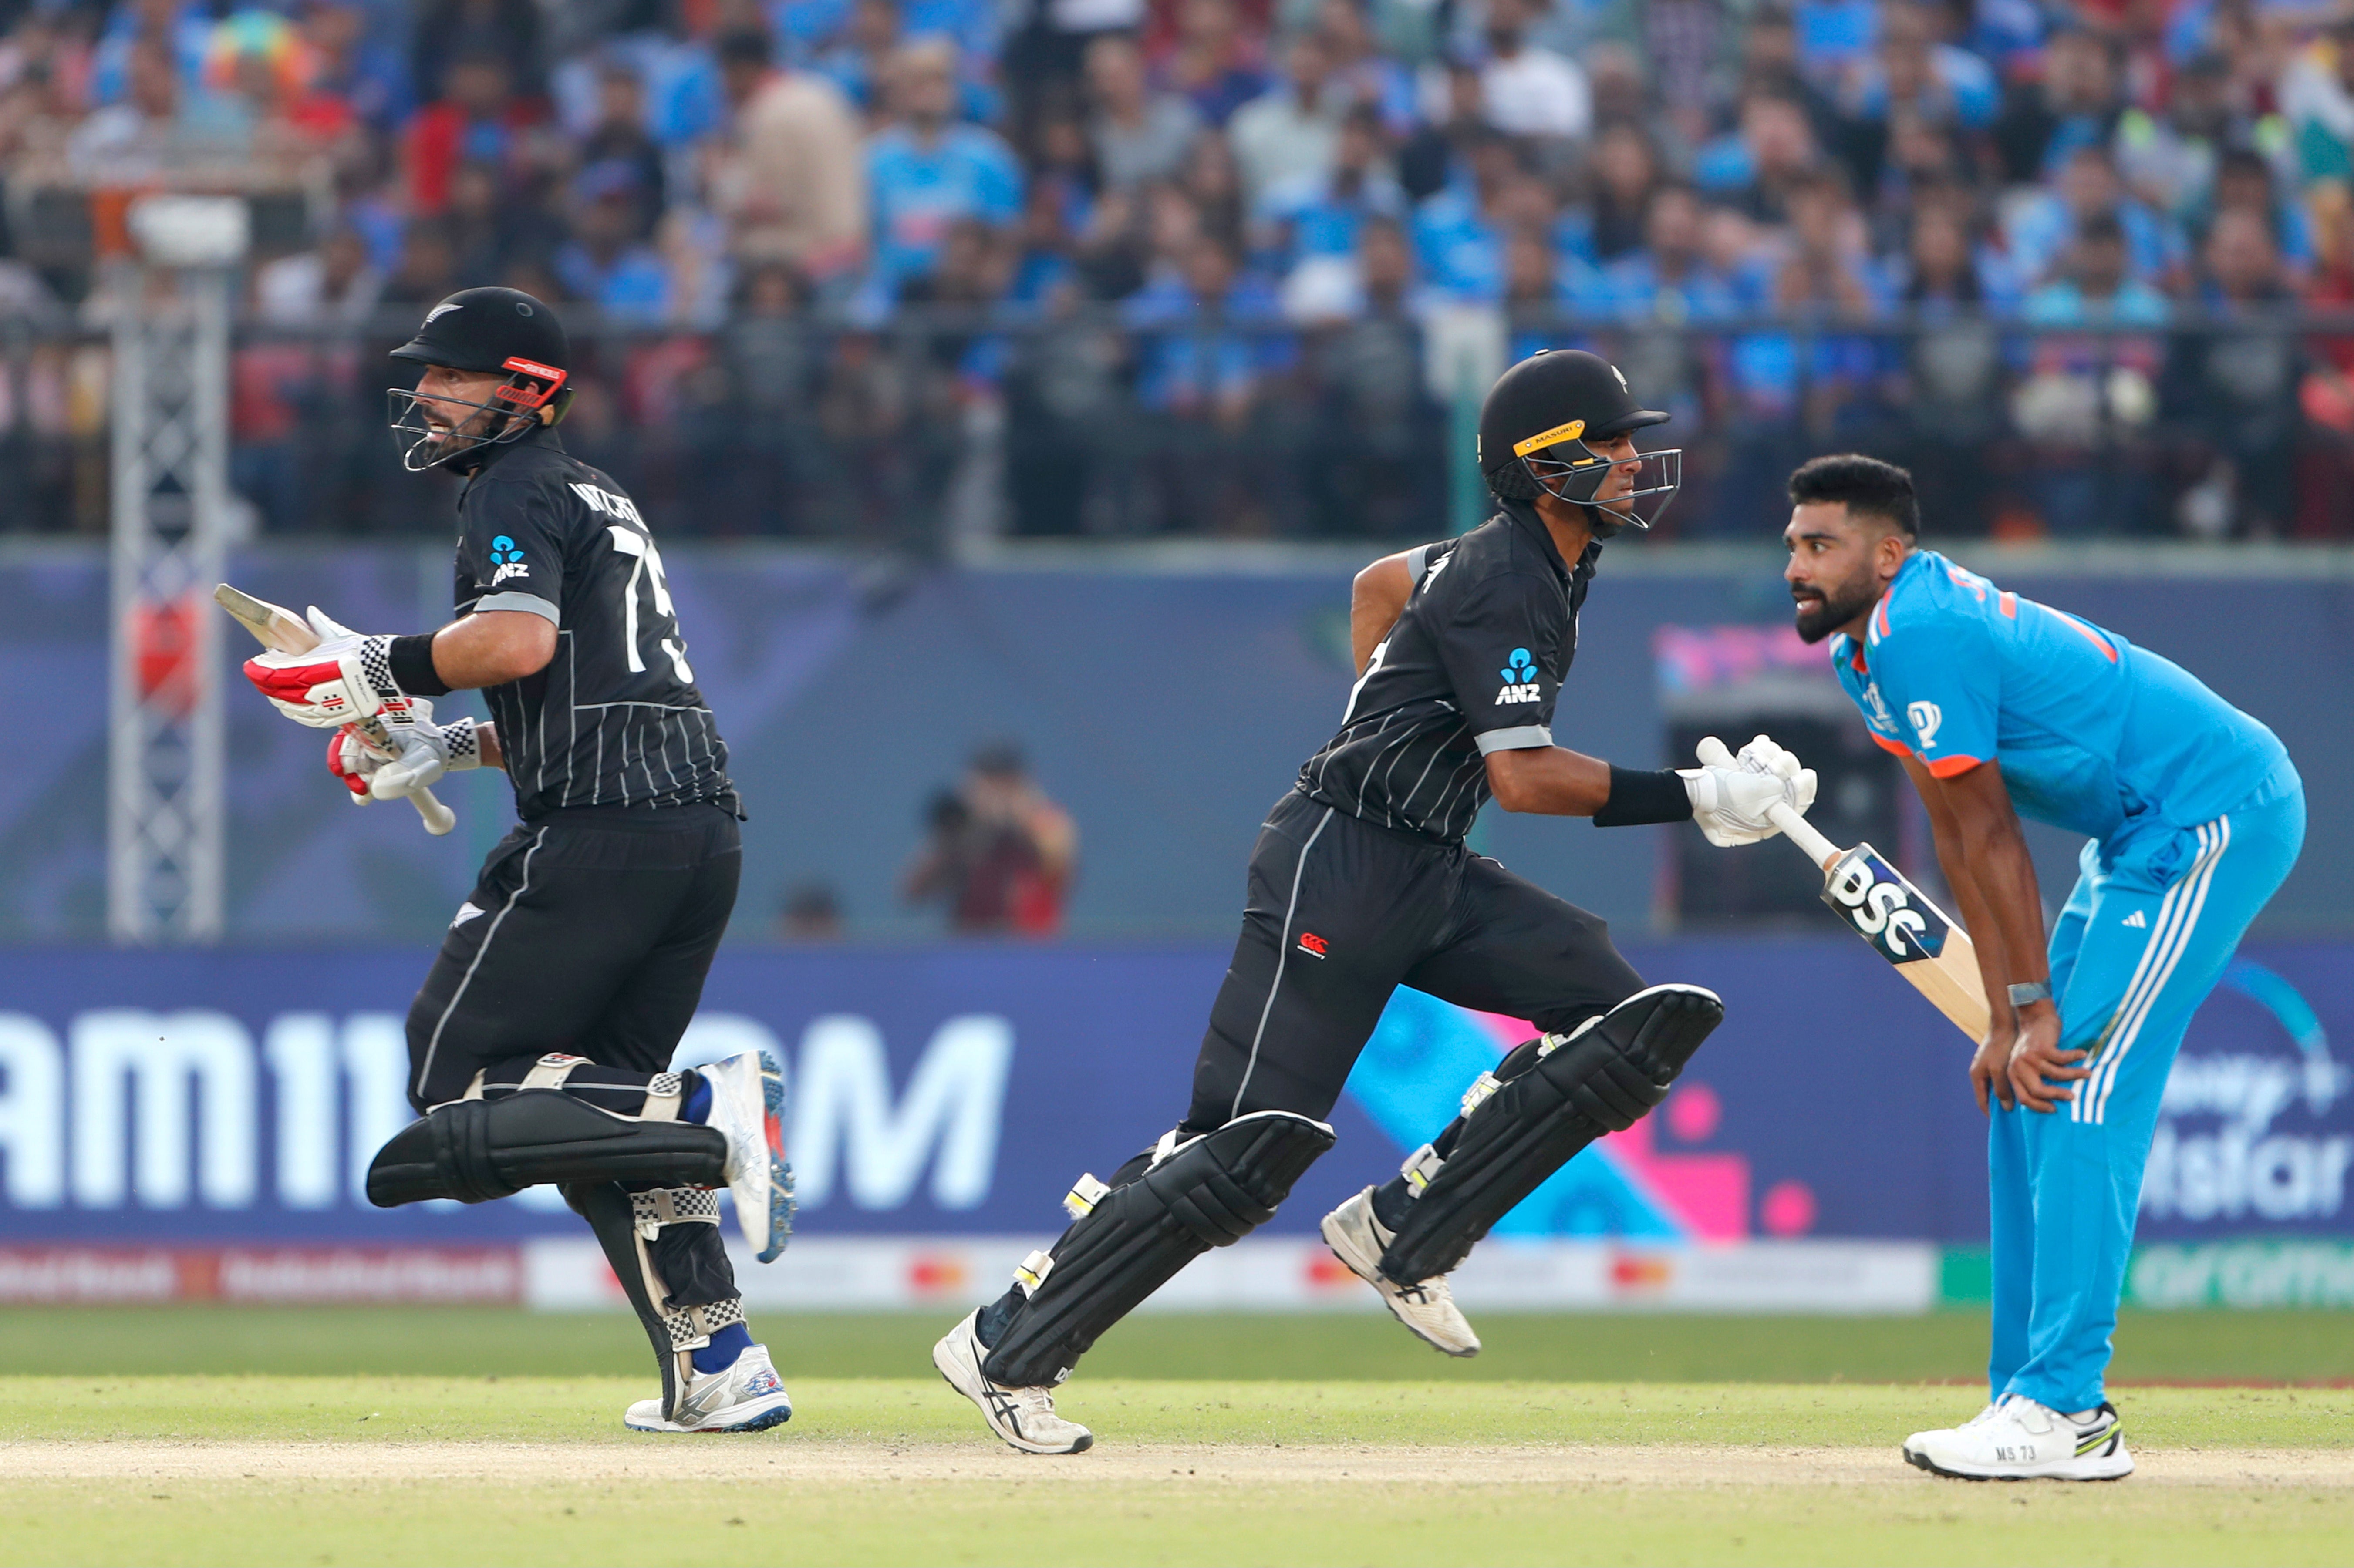 New Zealand and India meet in Mumbai in the first World Cup semi-final